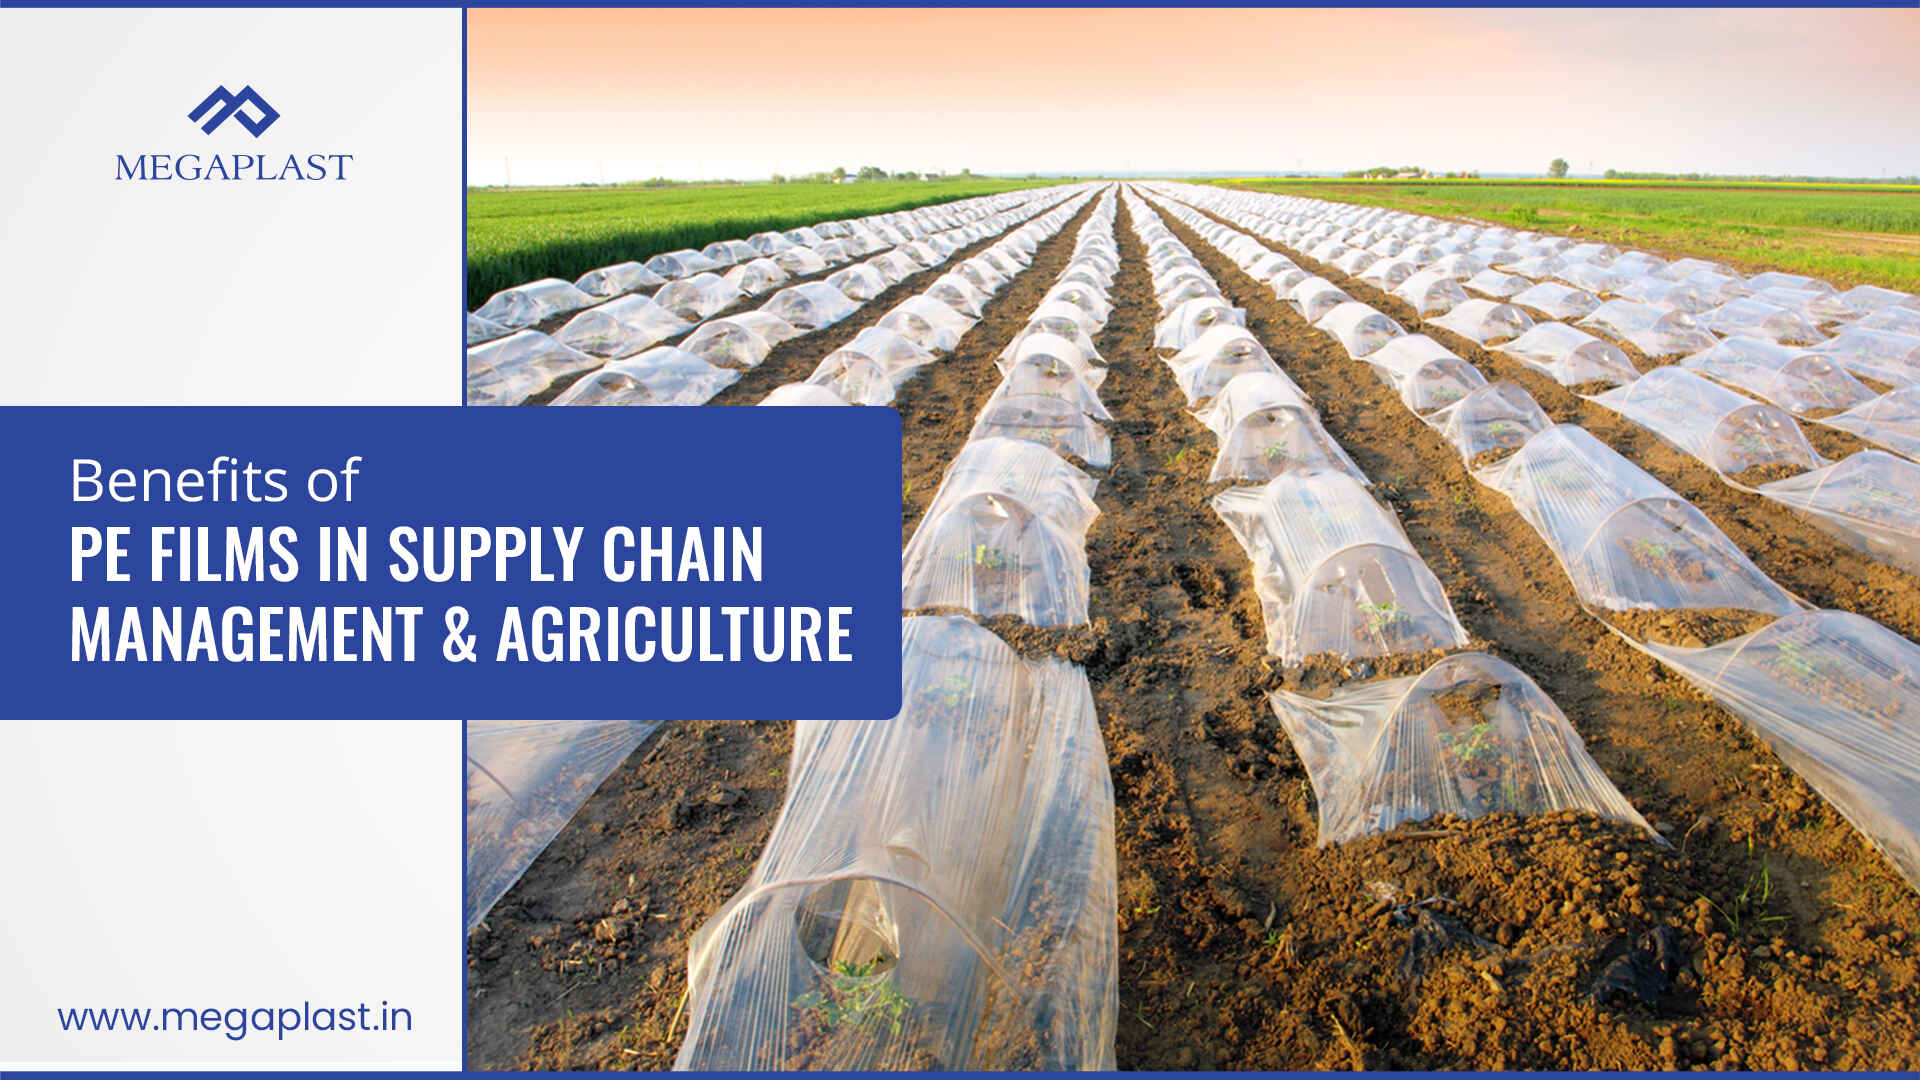 Benefits of PE Films in Supply Chain Management & Agriculture